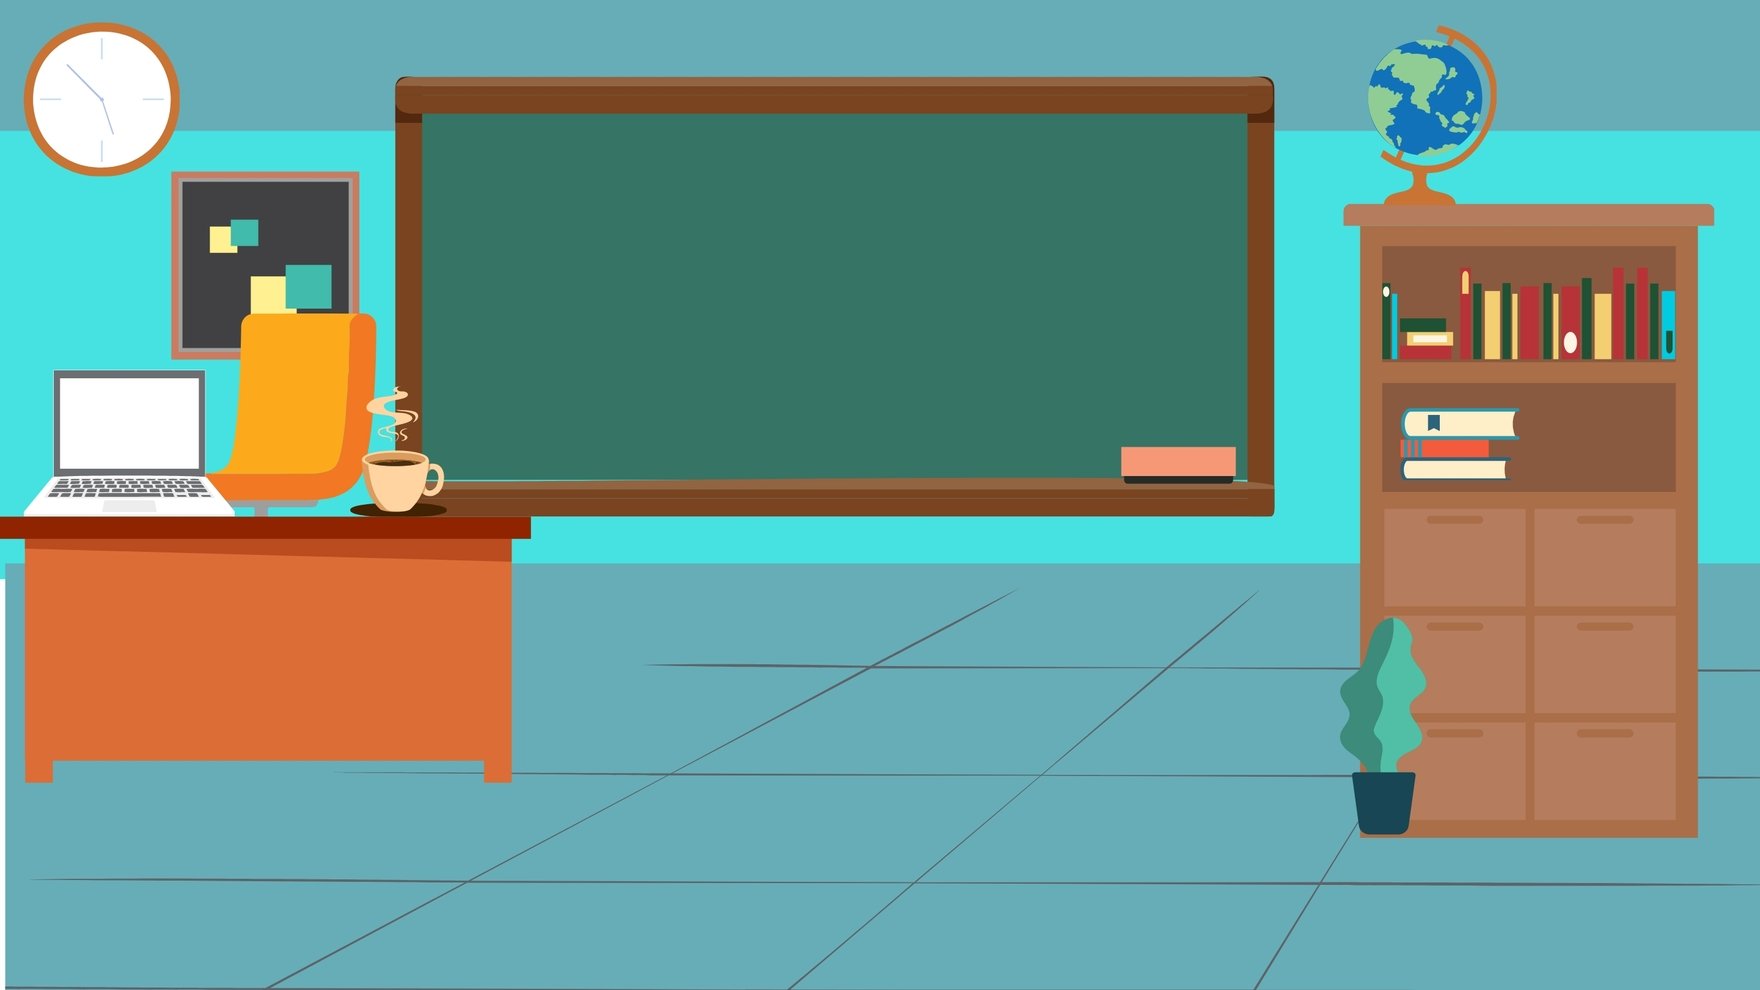 Free Anime Classroom Background - Download in Illustrator, EPS, SVG, JPG,  PNG